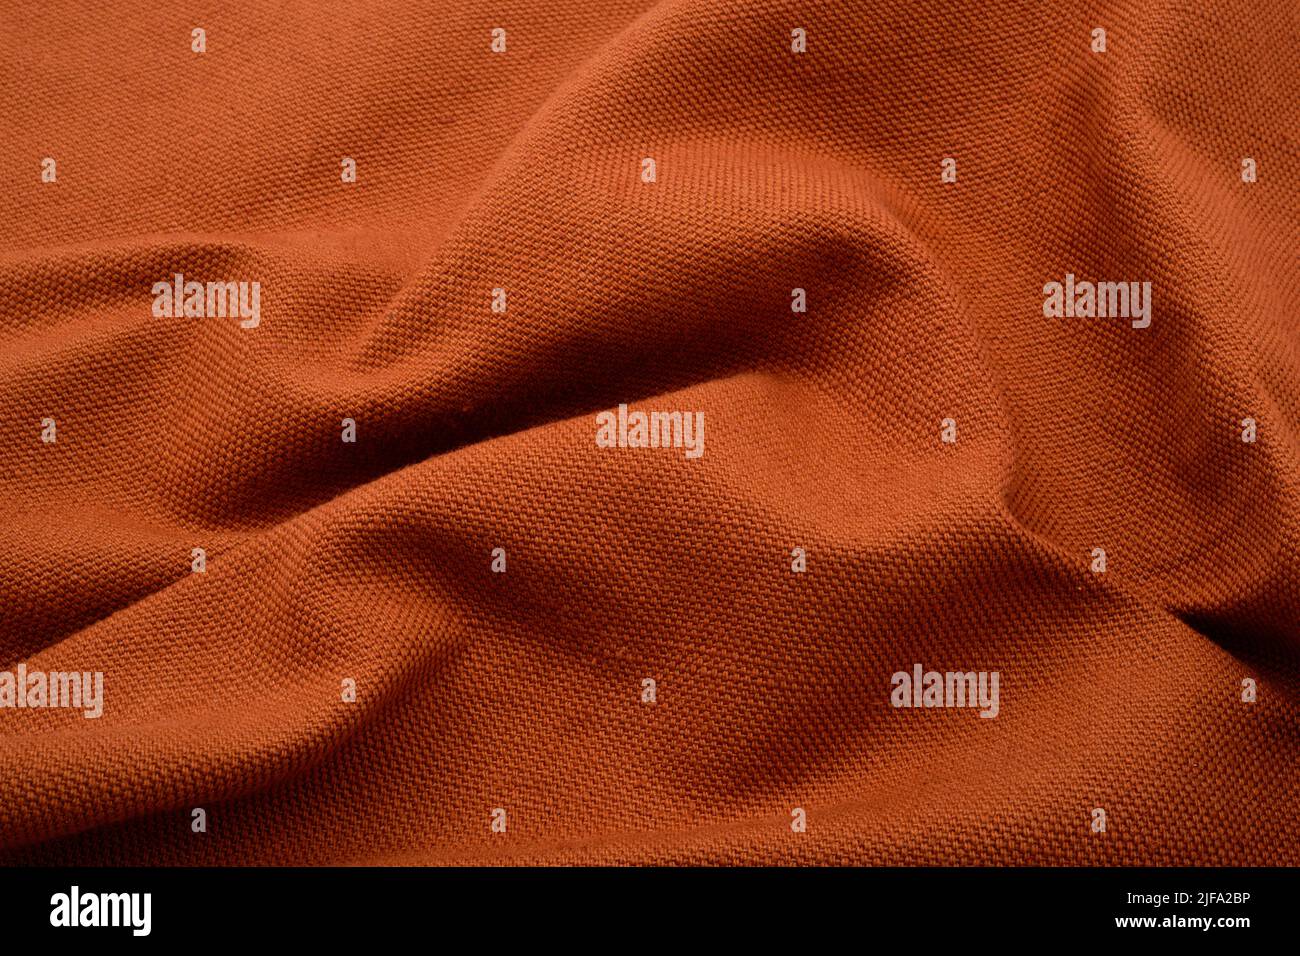 Textured fabric background. An earthy orange colour, ruched fabric. Stock Photo